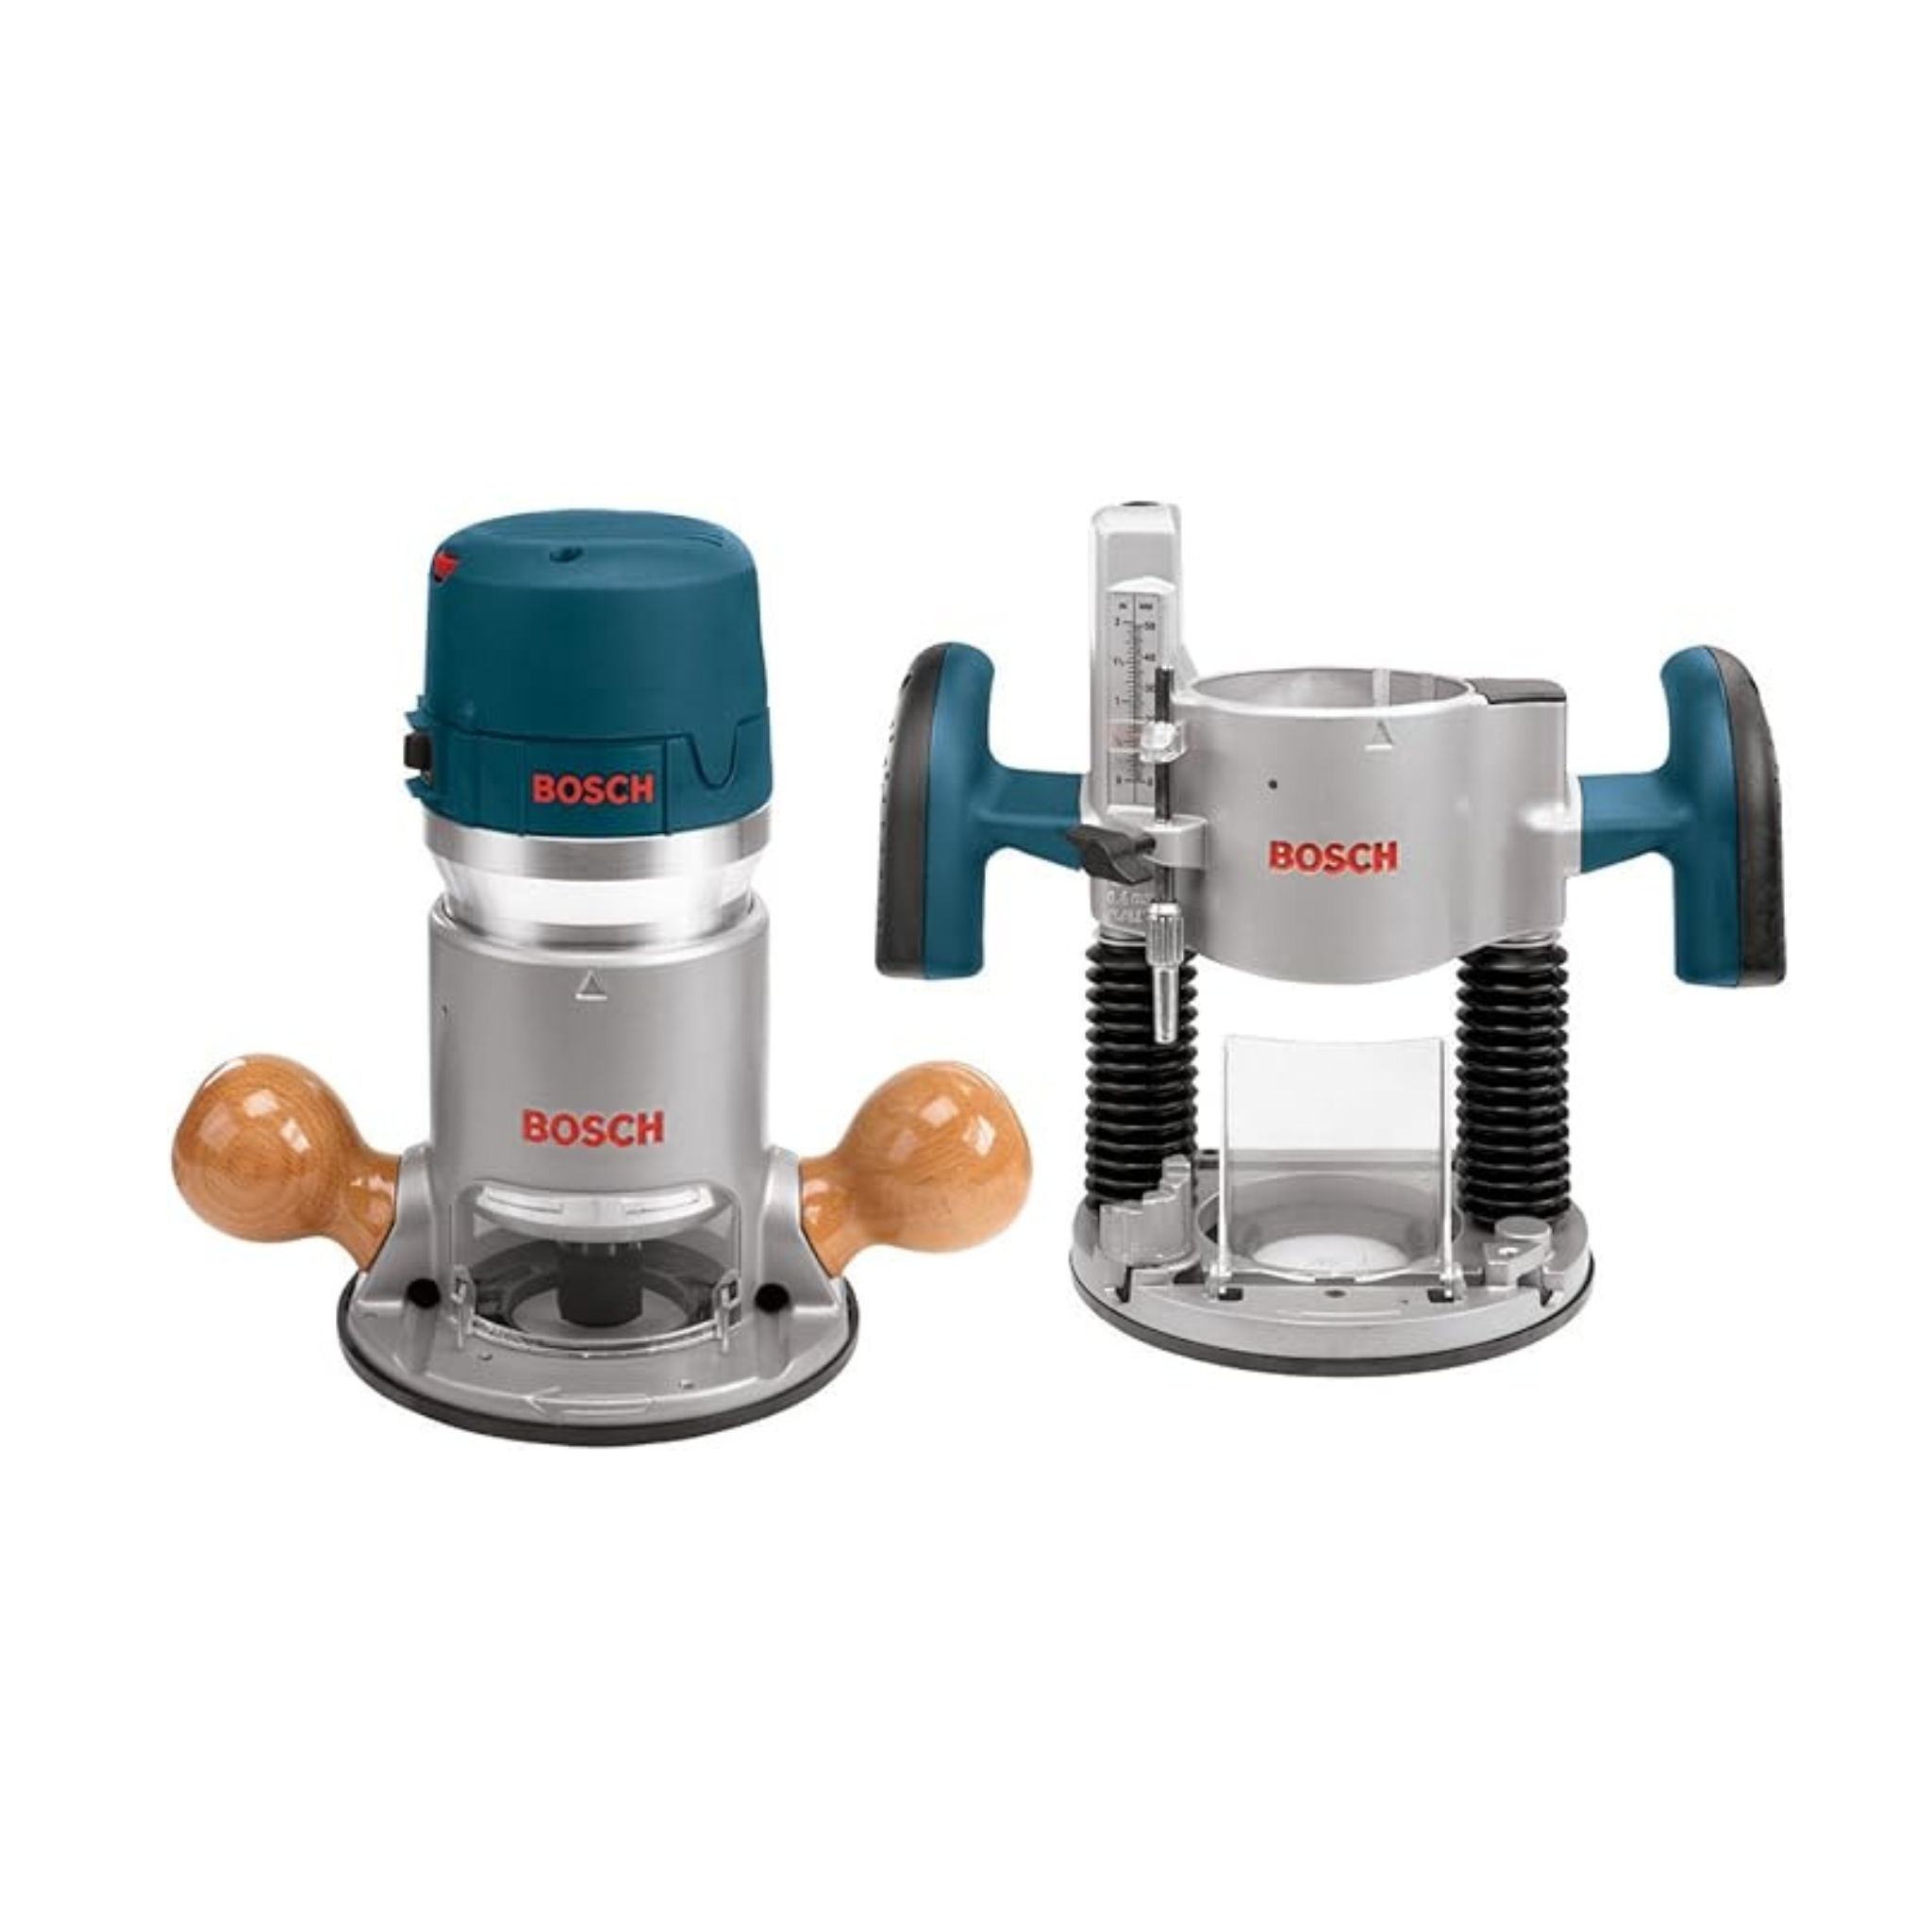 Bosch 12-Amp 2-1/4 HP Plunge & Fixed Base Corded Router Kit